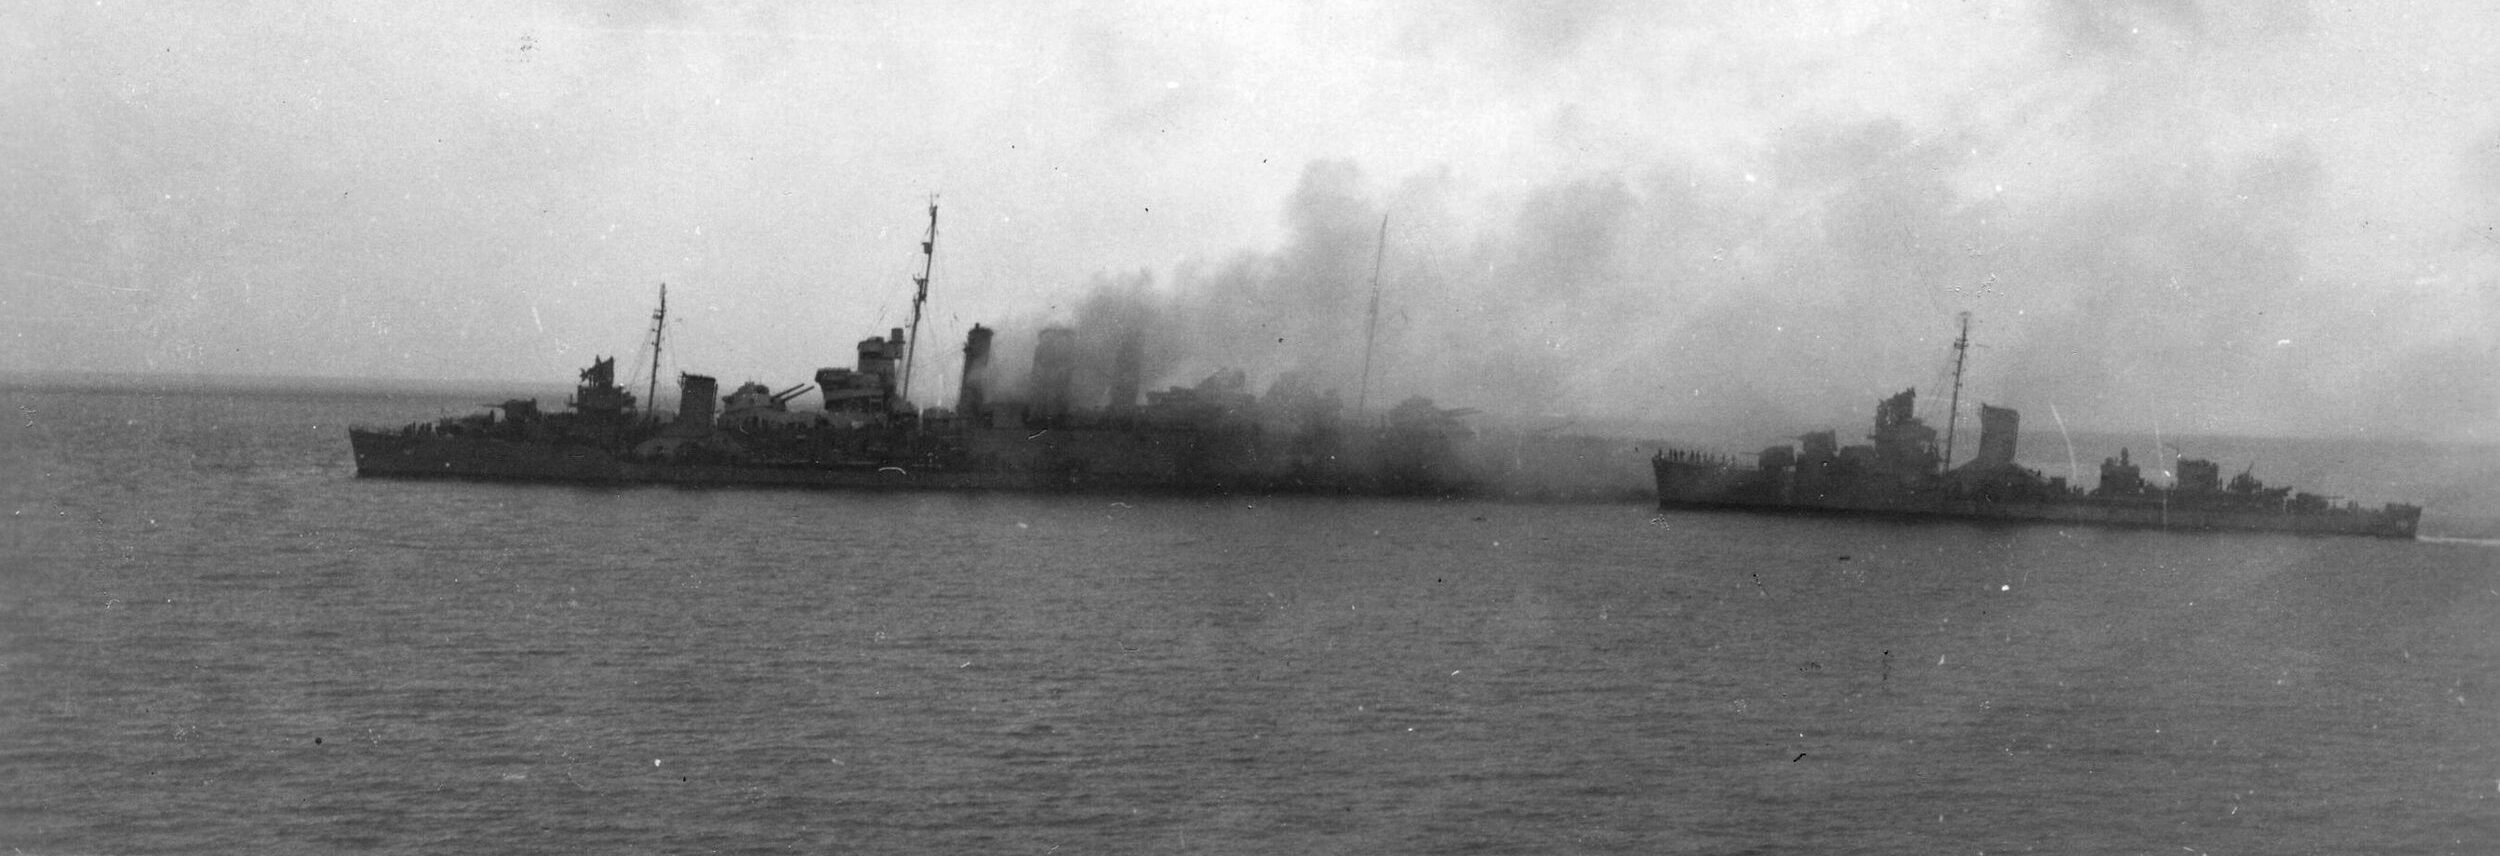 A still-smoking Canberra, the day after the battle. She was sunk by friendly fire.